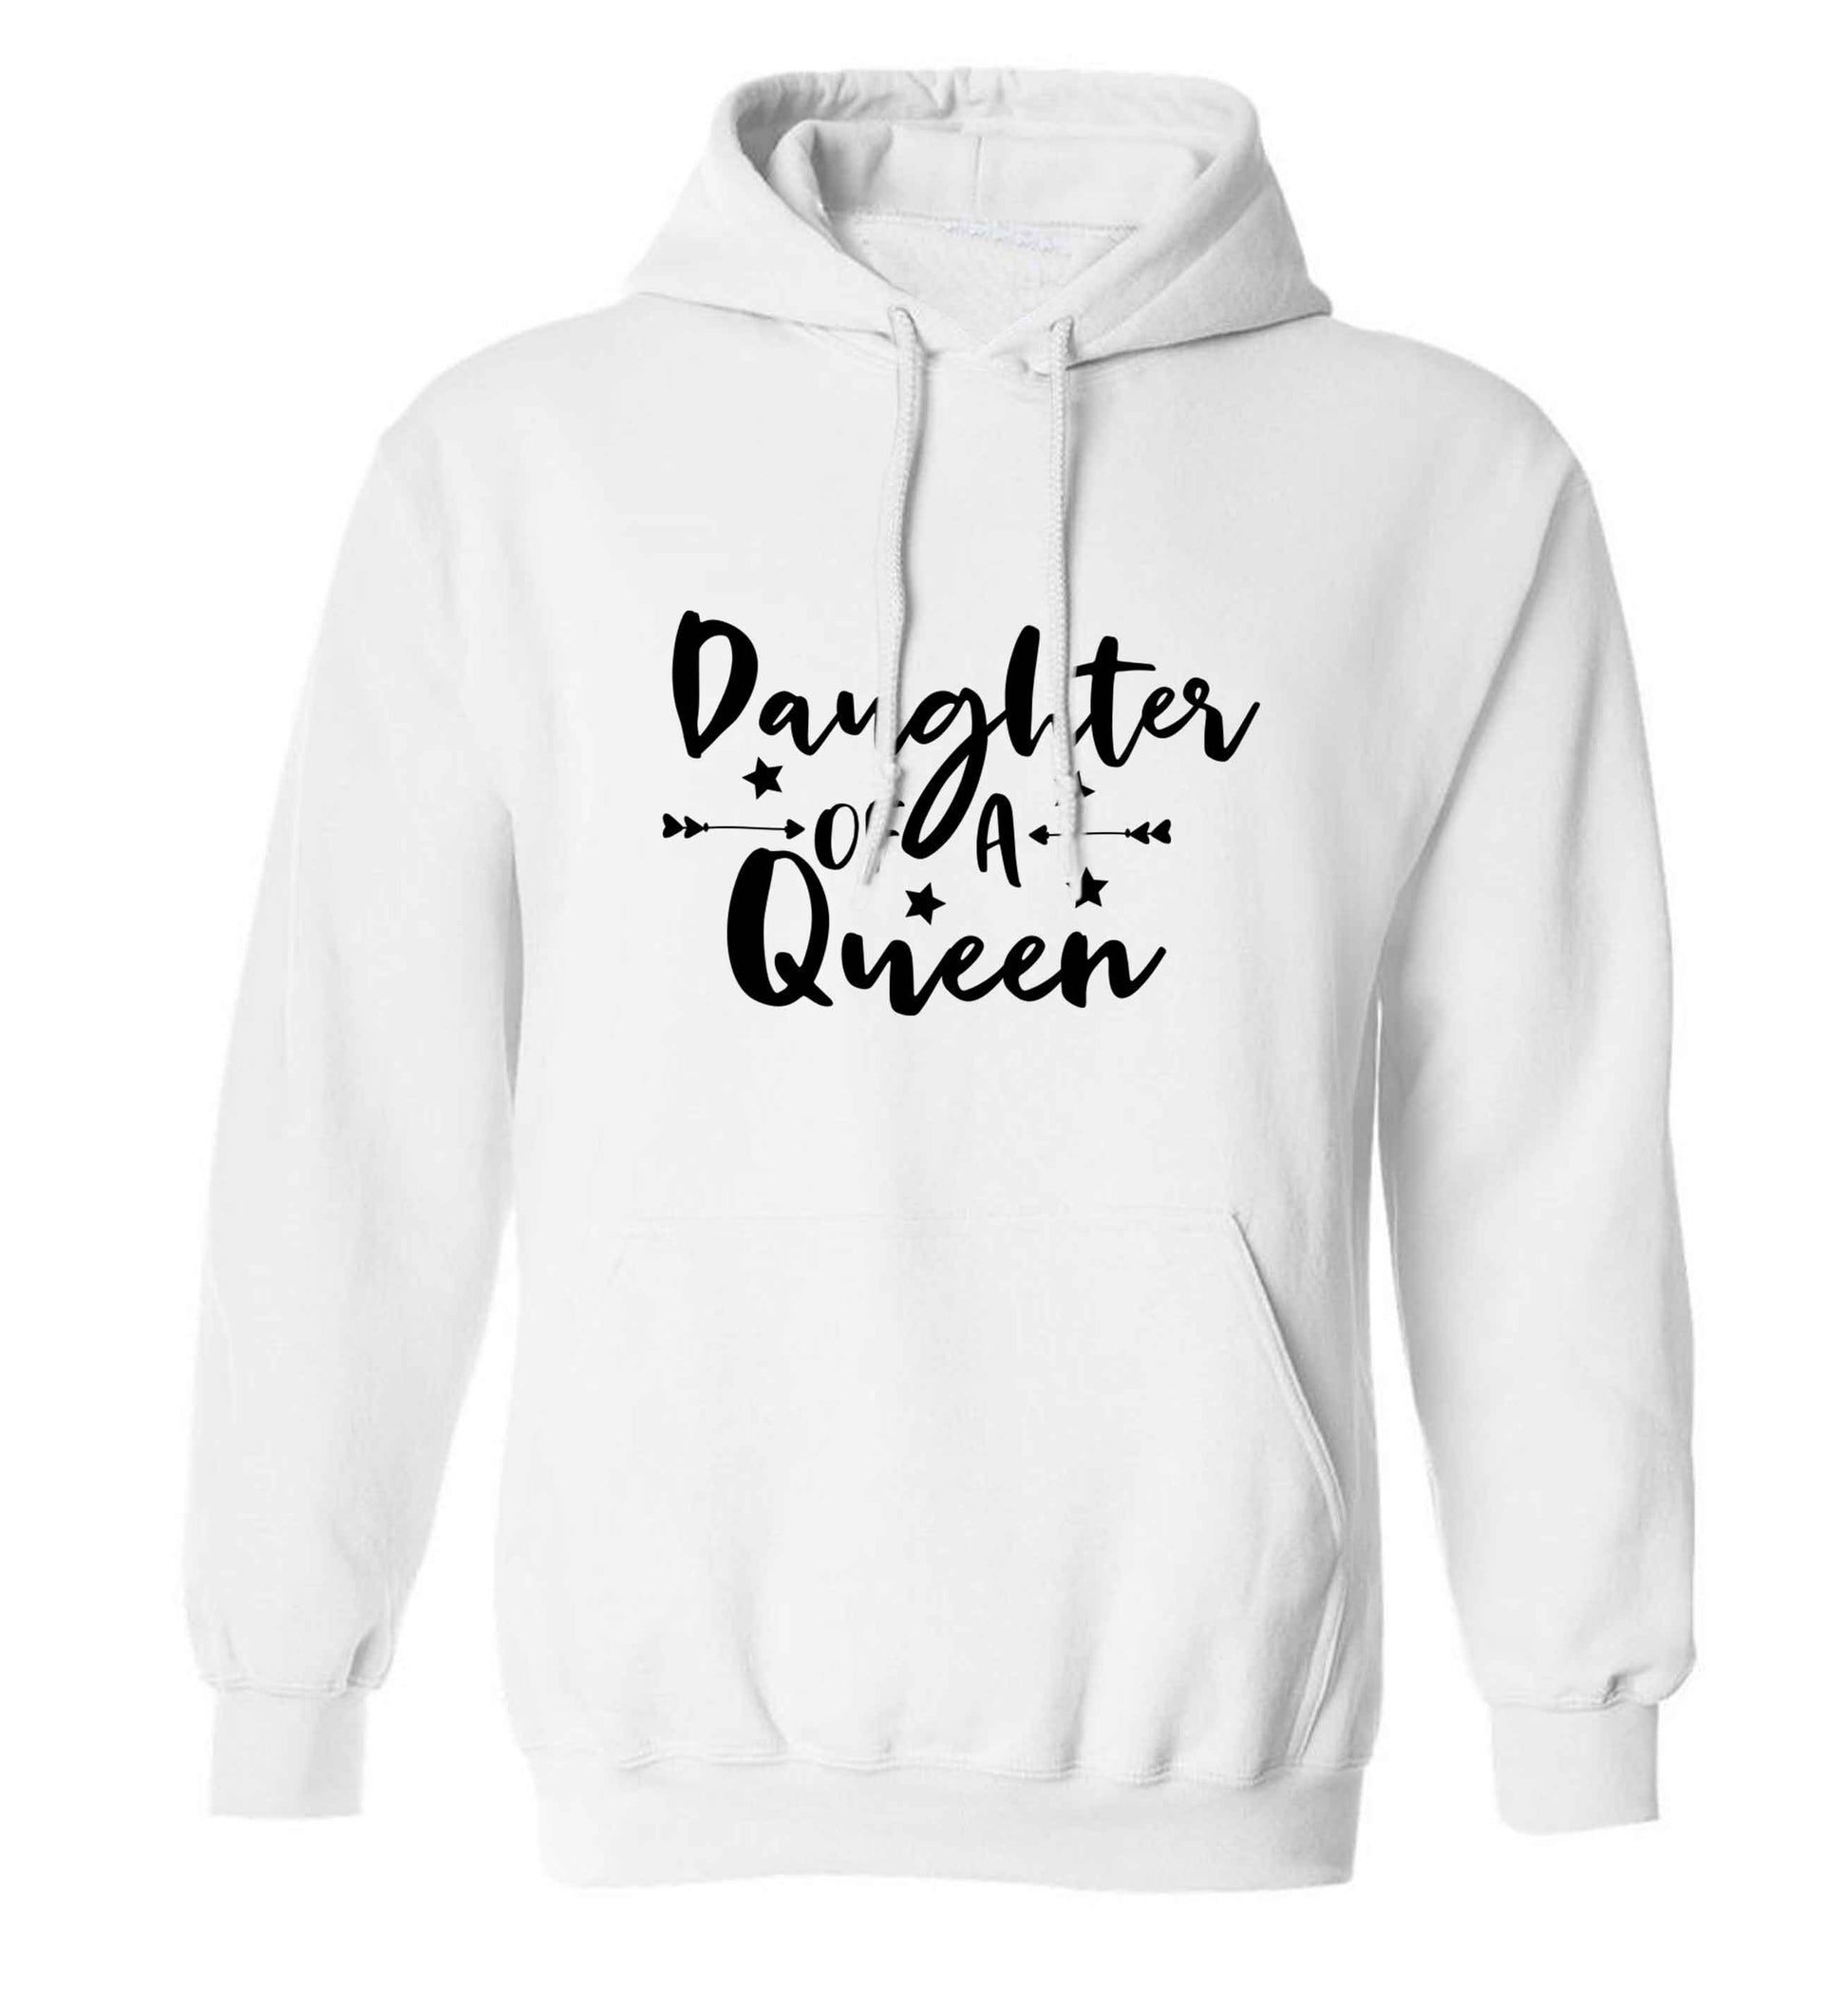 Daughter of a Queen adults unisex white hoodie 2XL